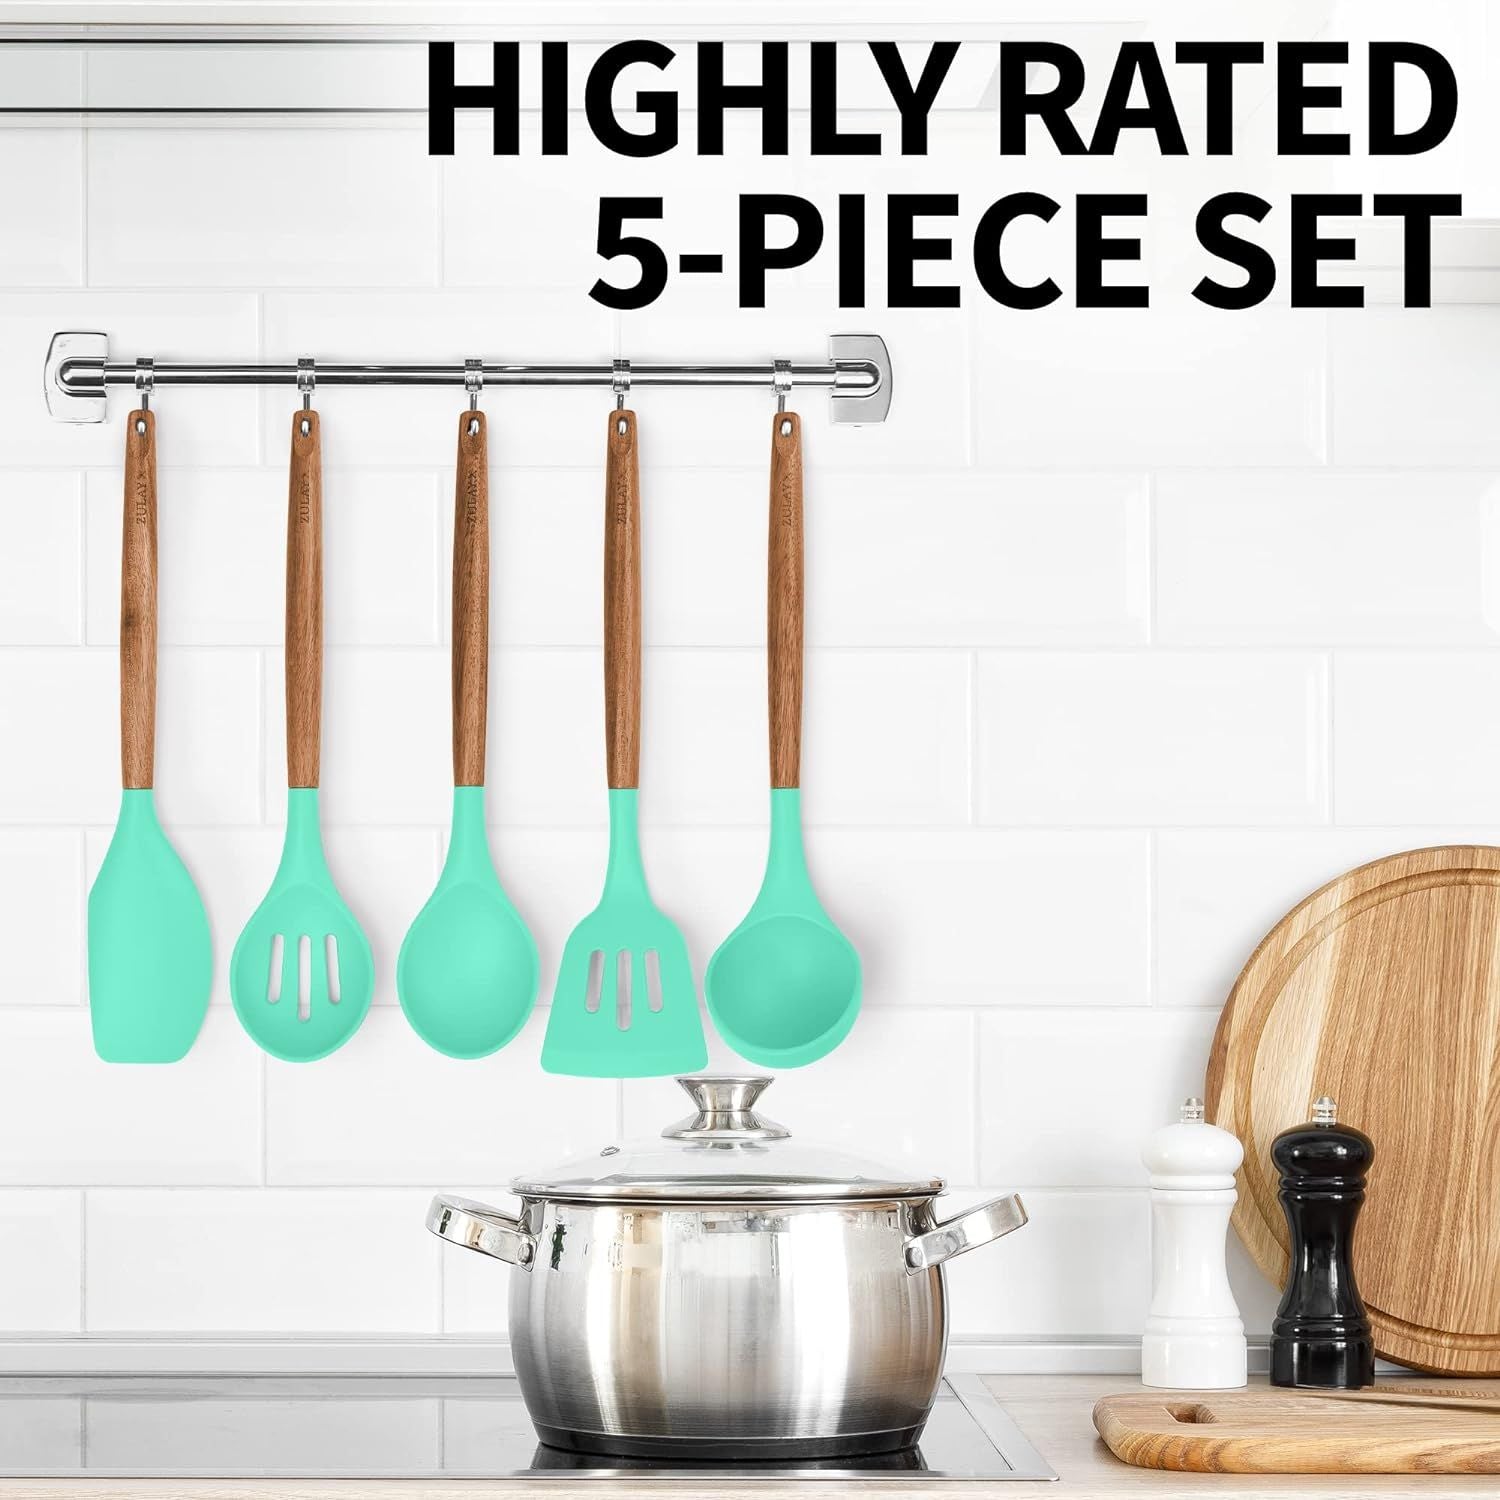 highly rated 5-piece set Silicone Utensils